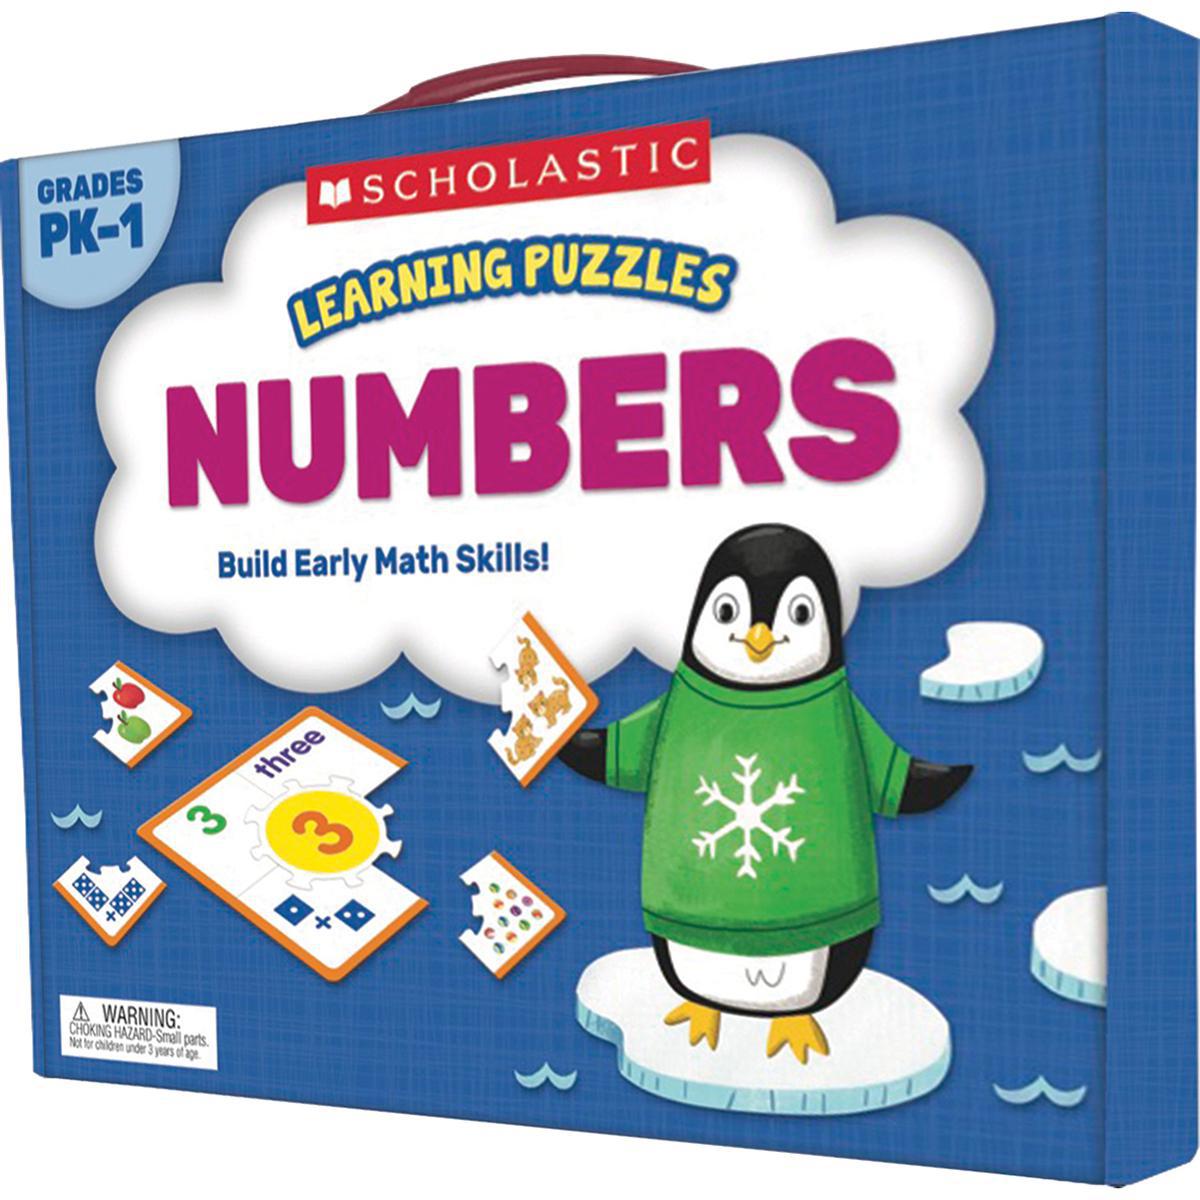  Learning Puzzles: Numbers 